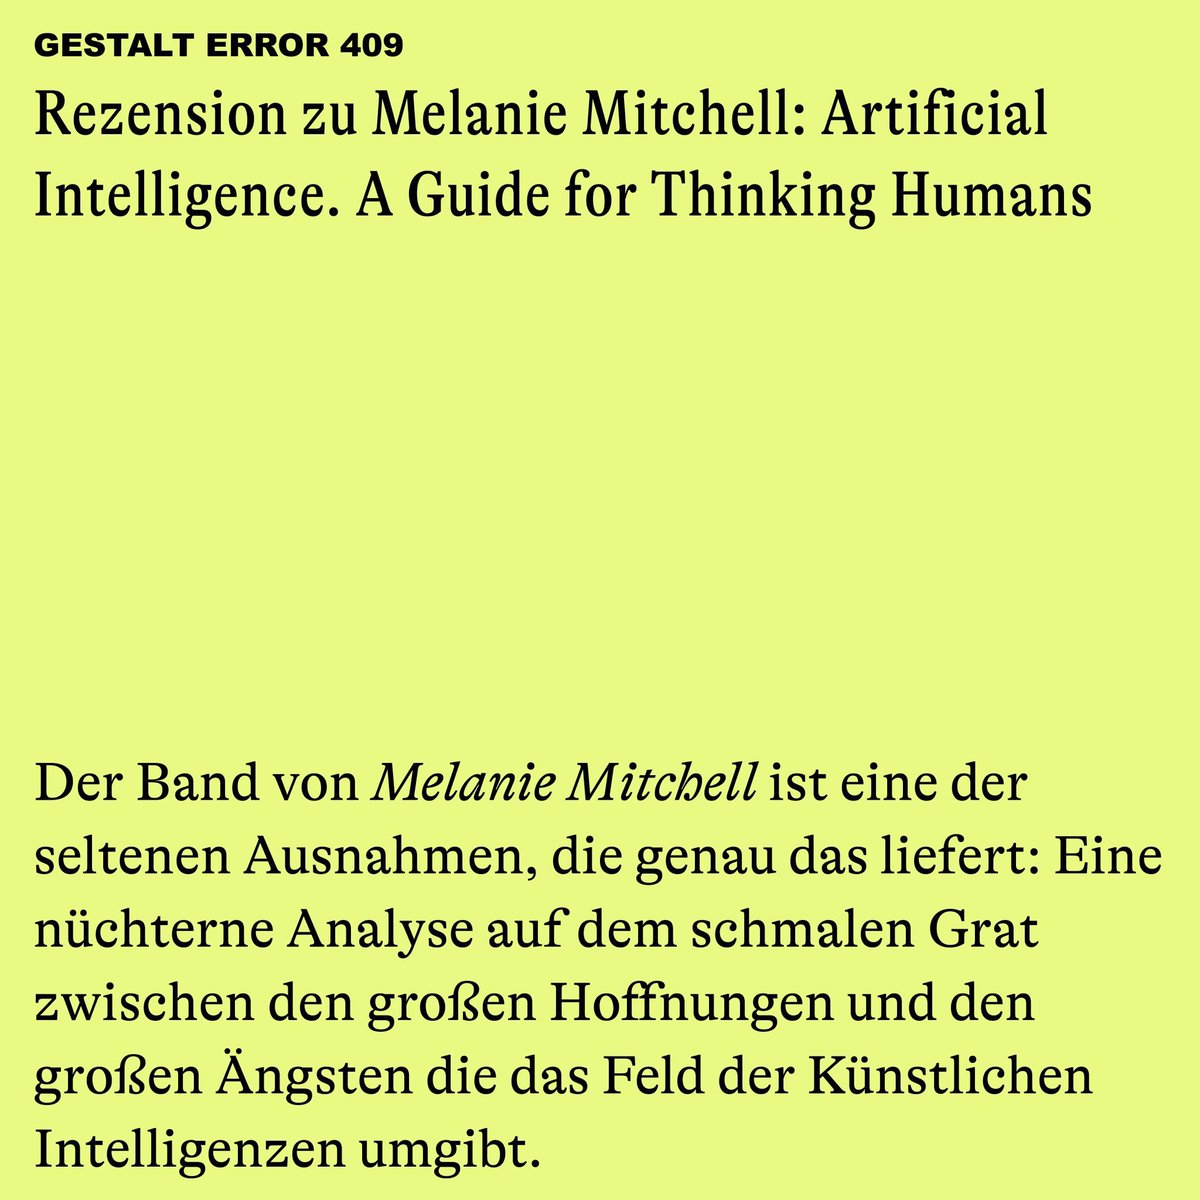 Rezension von @carl_then über @MelMitchell1 Artificial Intellegence. A Guide for Human Thinking. Highly recommended 🐳